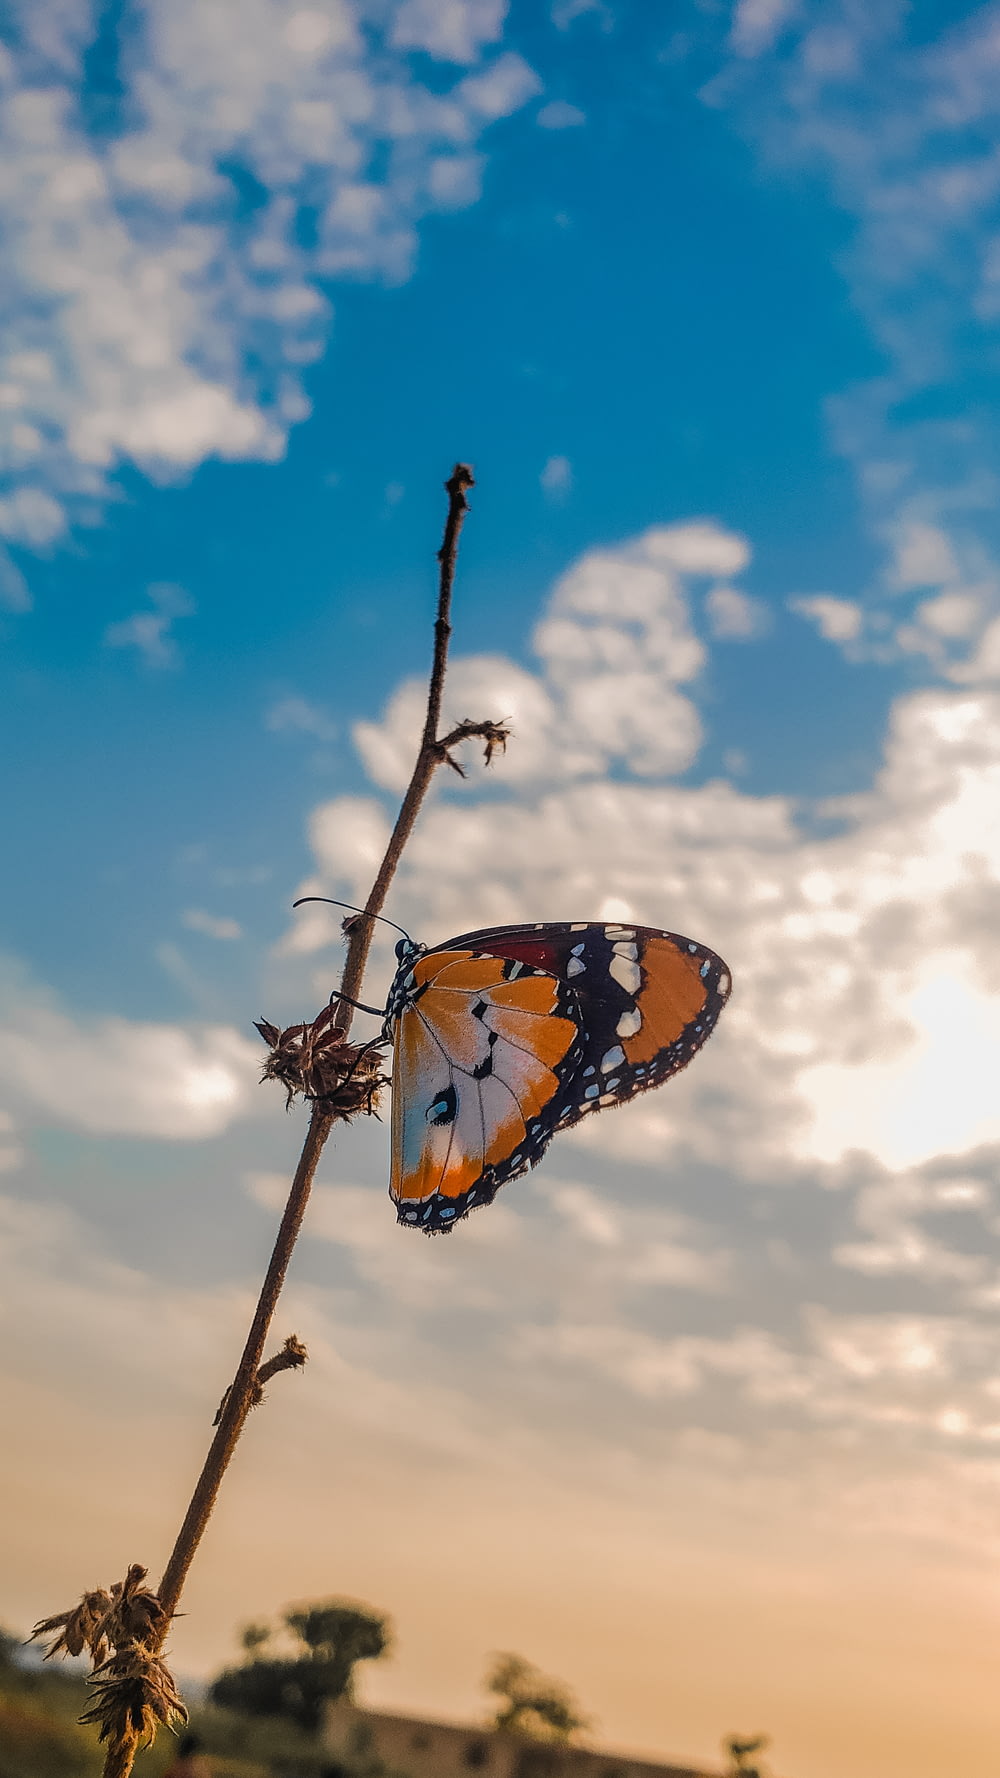 brown and black butterfly on brown stem under blue and white cloudy sky during daytime